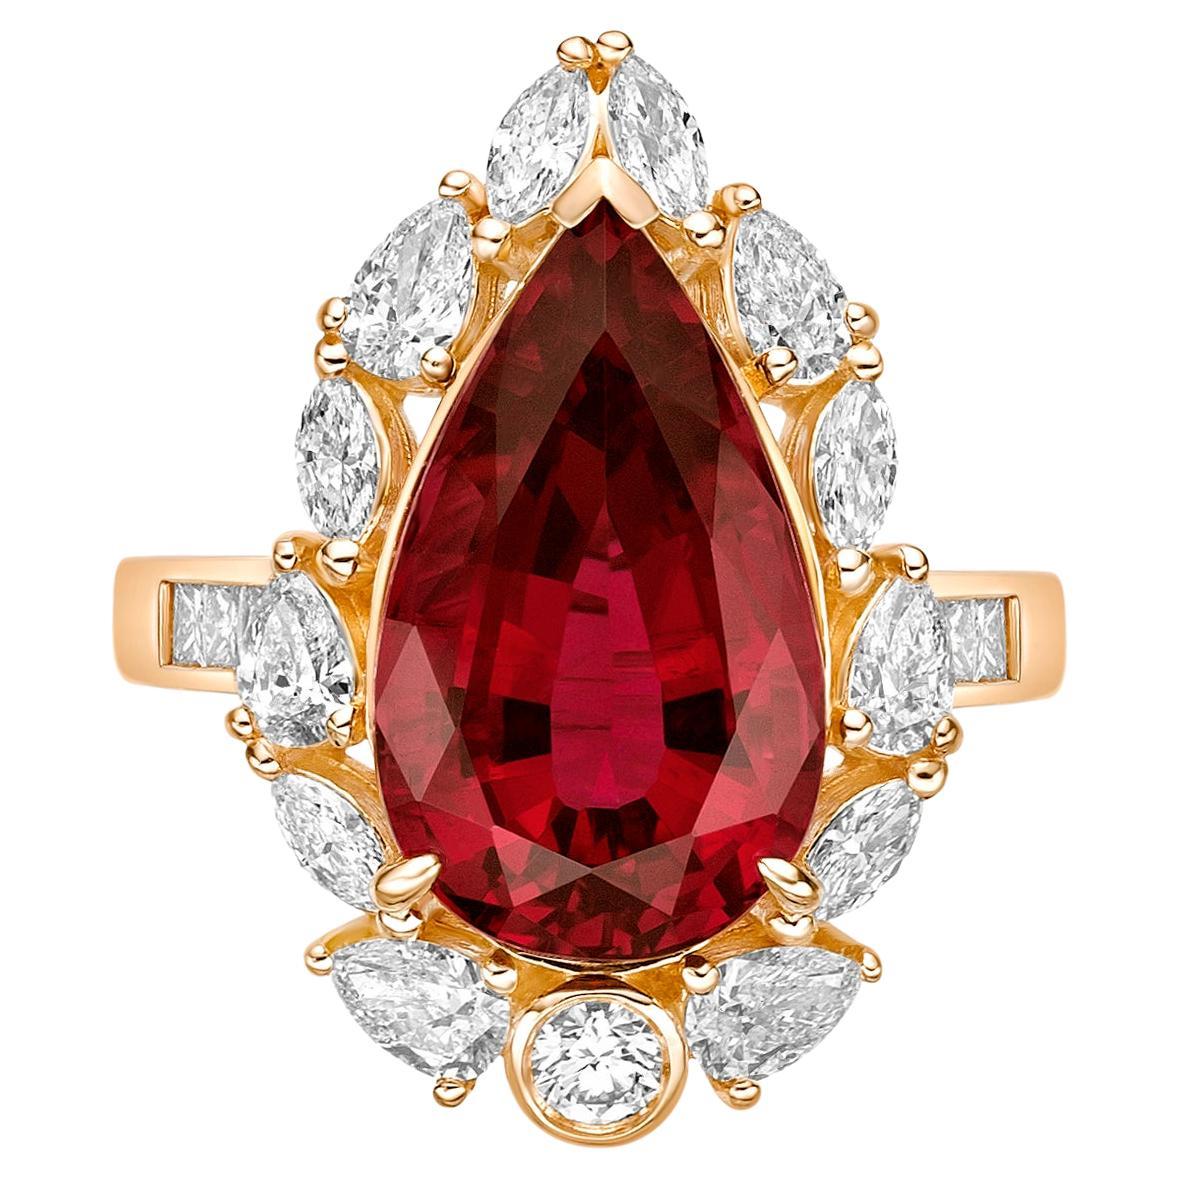 6.991 Carat Rubelite Fancy Ring in 18Karat Yellow Gold with White Diamond. For Sale